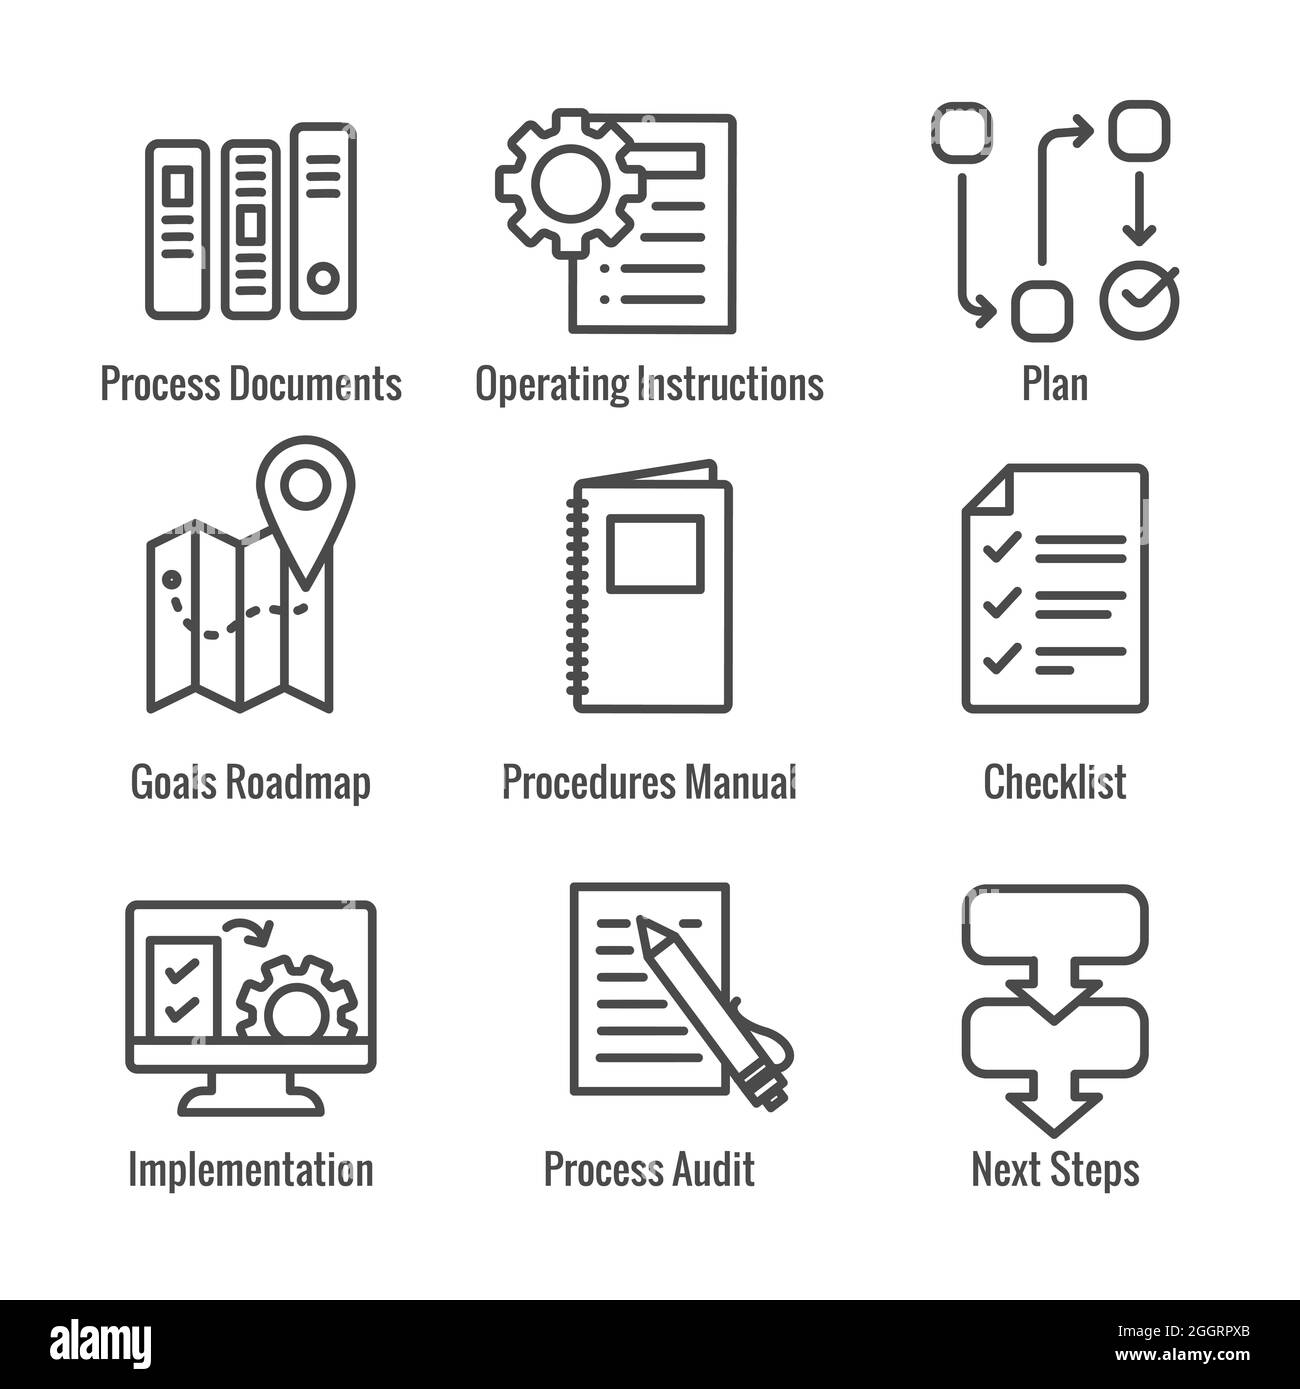 Standard Procedures for Operating a Business - Manual, Steps, and Implementation including outline icons sop Stock Photo